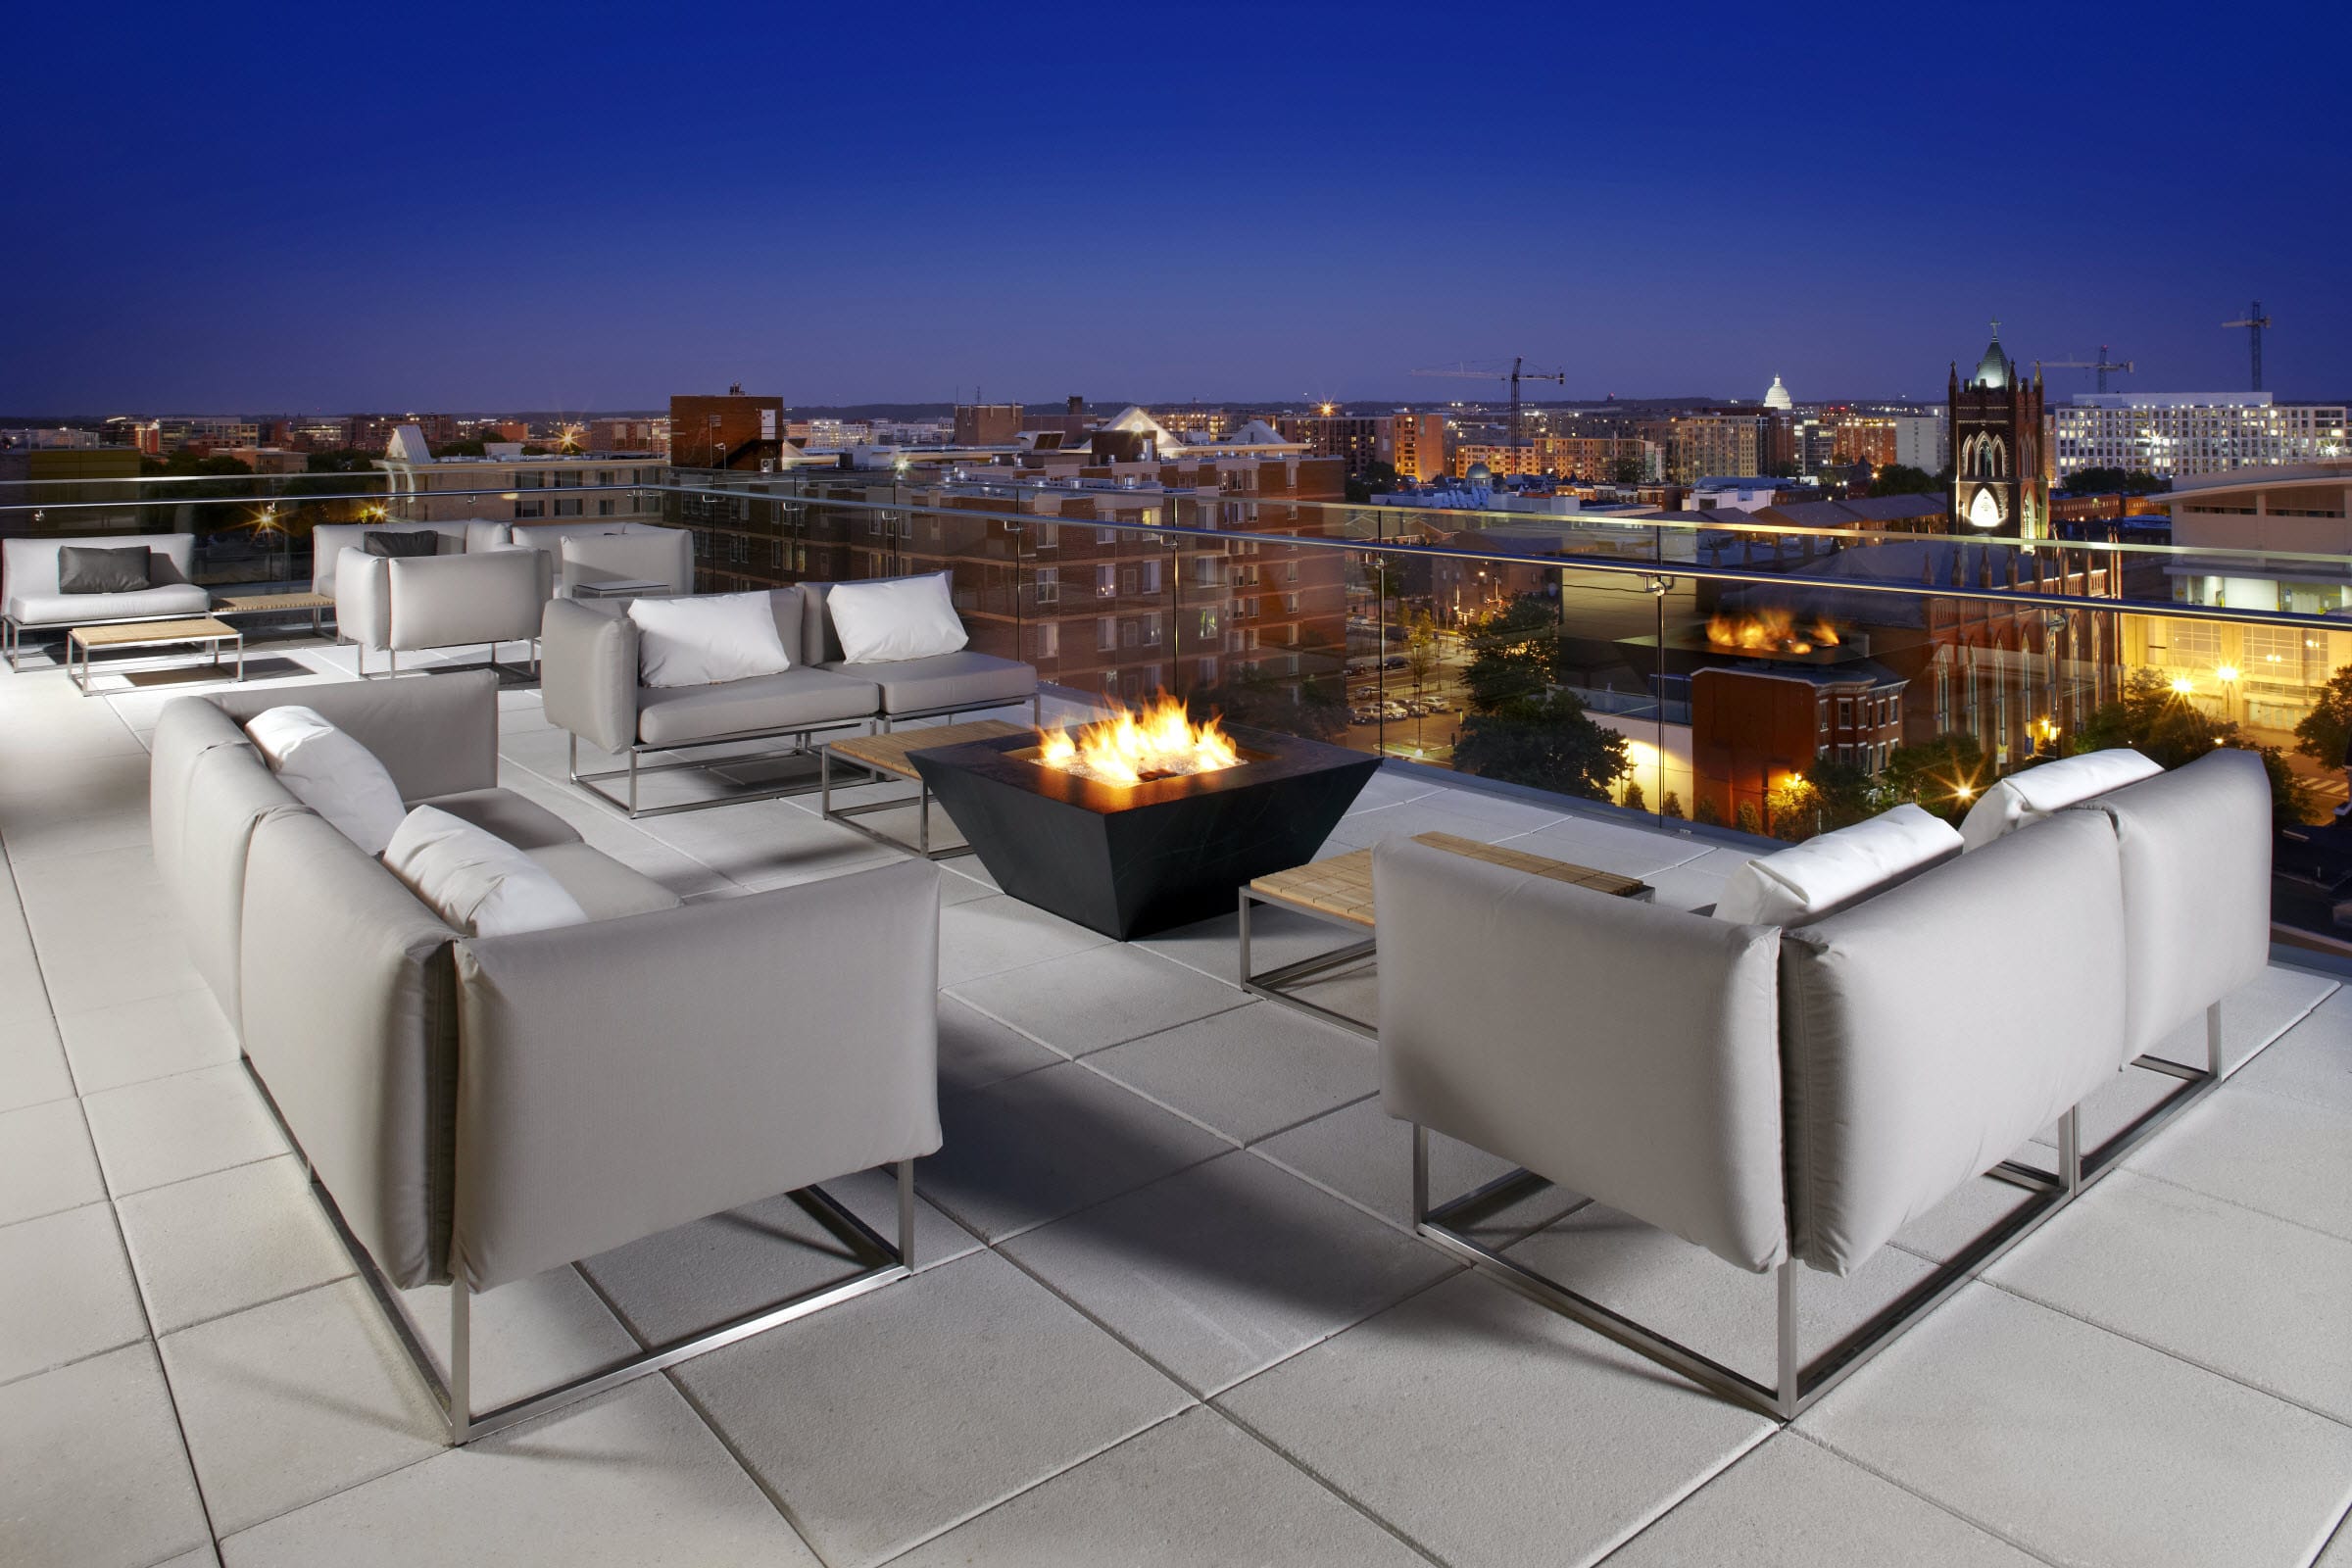 Cambria Hotels DC-Convention-Center-Rooftop-Night